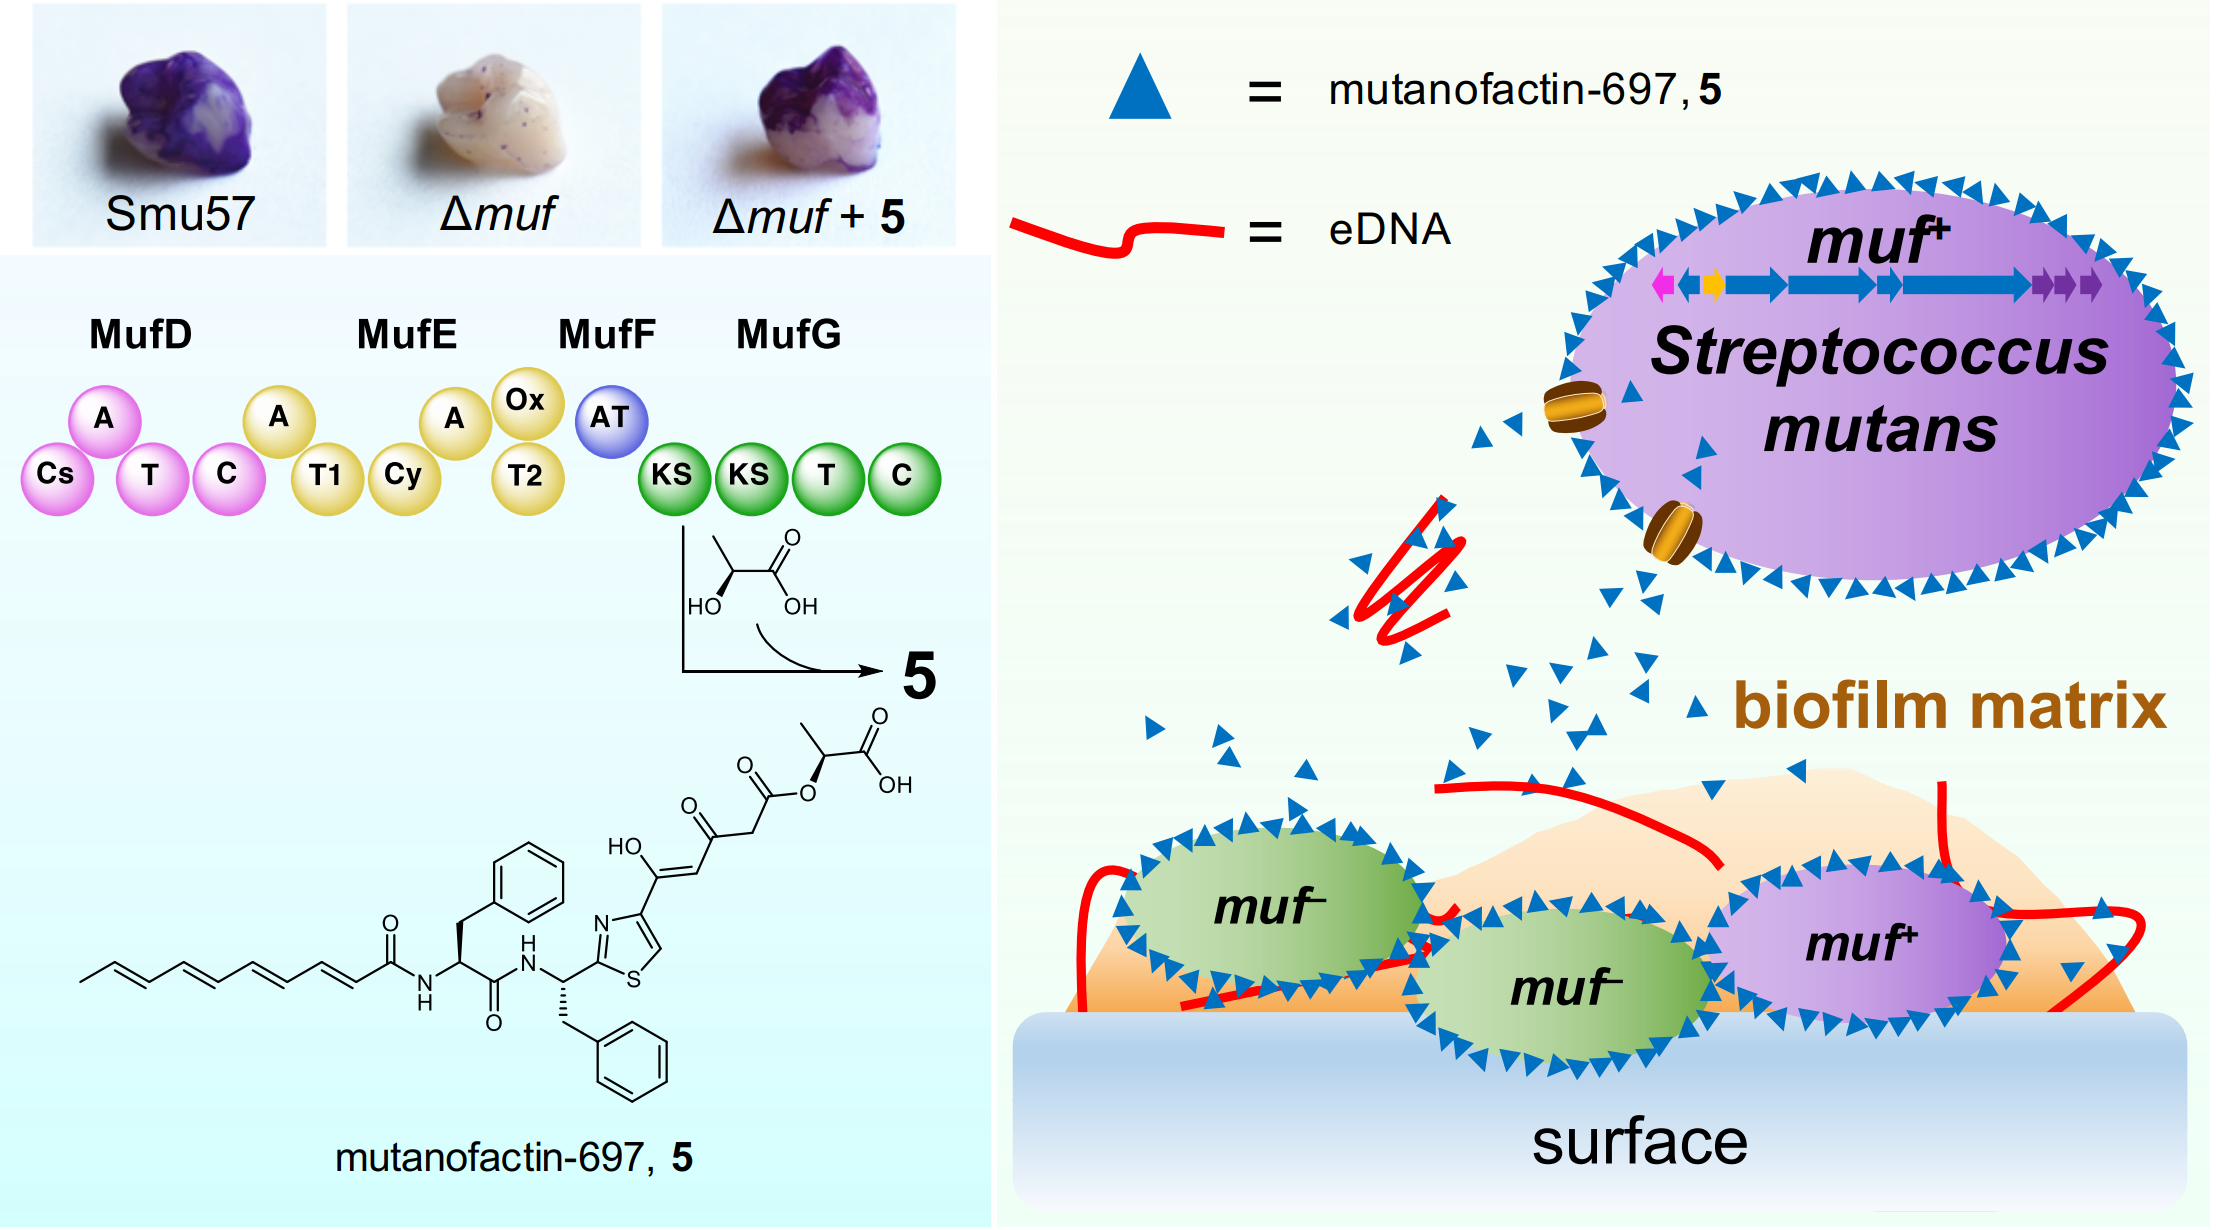 (Left up panel) Effect of biosynthetic gene cluster muf or mutanofactin-697 (5) on biofilm formation on the surface of artificial acryl teeth. (Left bottom panel) Proposed biosynthetic pathway for mutanofactin-697 (5). (Right panel) Proposed mechanism for mutanofactin-697 (5)-promoted biofilm formation of streptococci. After being biosynthesized and secreted from a producing streptococcus, 5 binds to self and neighboring streptococci, forming surface layers around bacterial cells. The hydrophobic layer increases bacterial cell surface hydrophobicity, promotes initial bacterial adhesion and subsequent biofilm formation and maturation. In addition, 5 also directly binds to eDNA and facilities eDNA-mediated cell aggregation and biofilm formation.